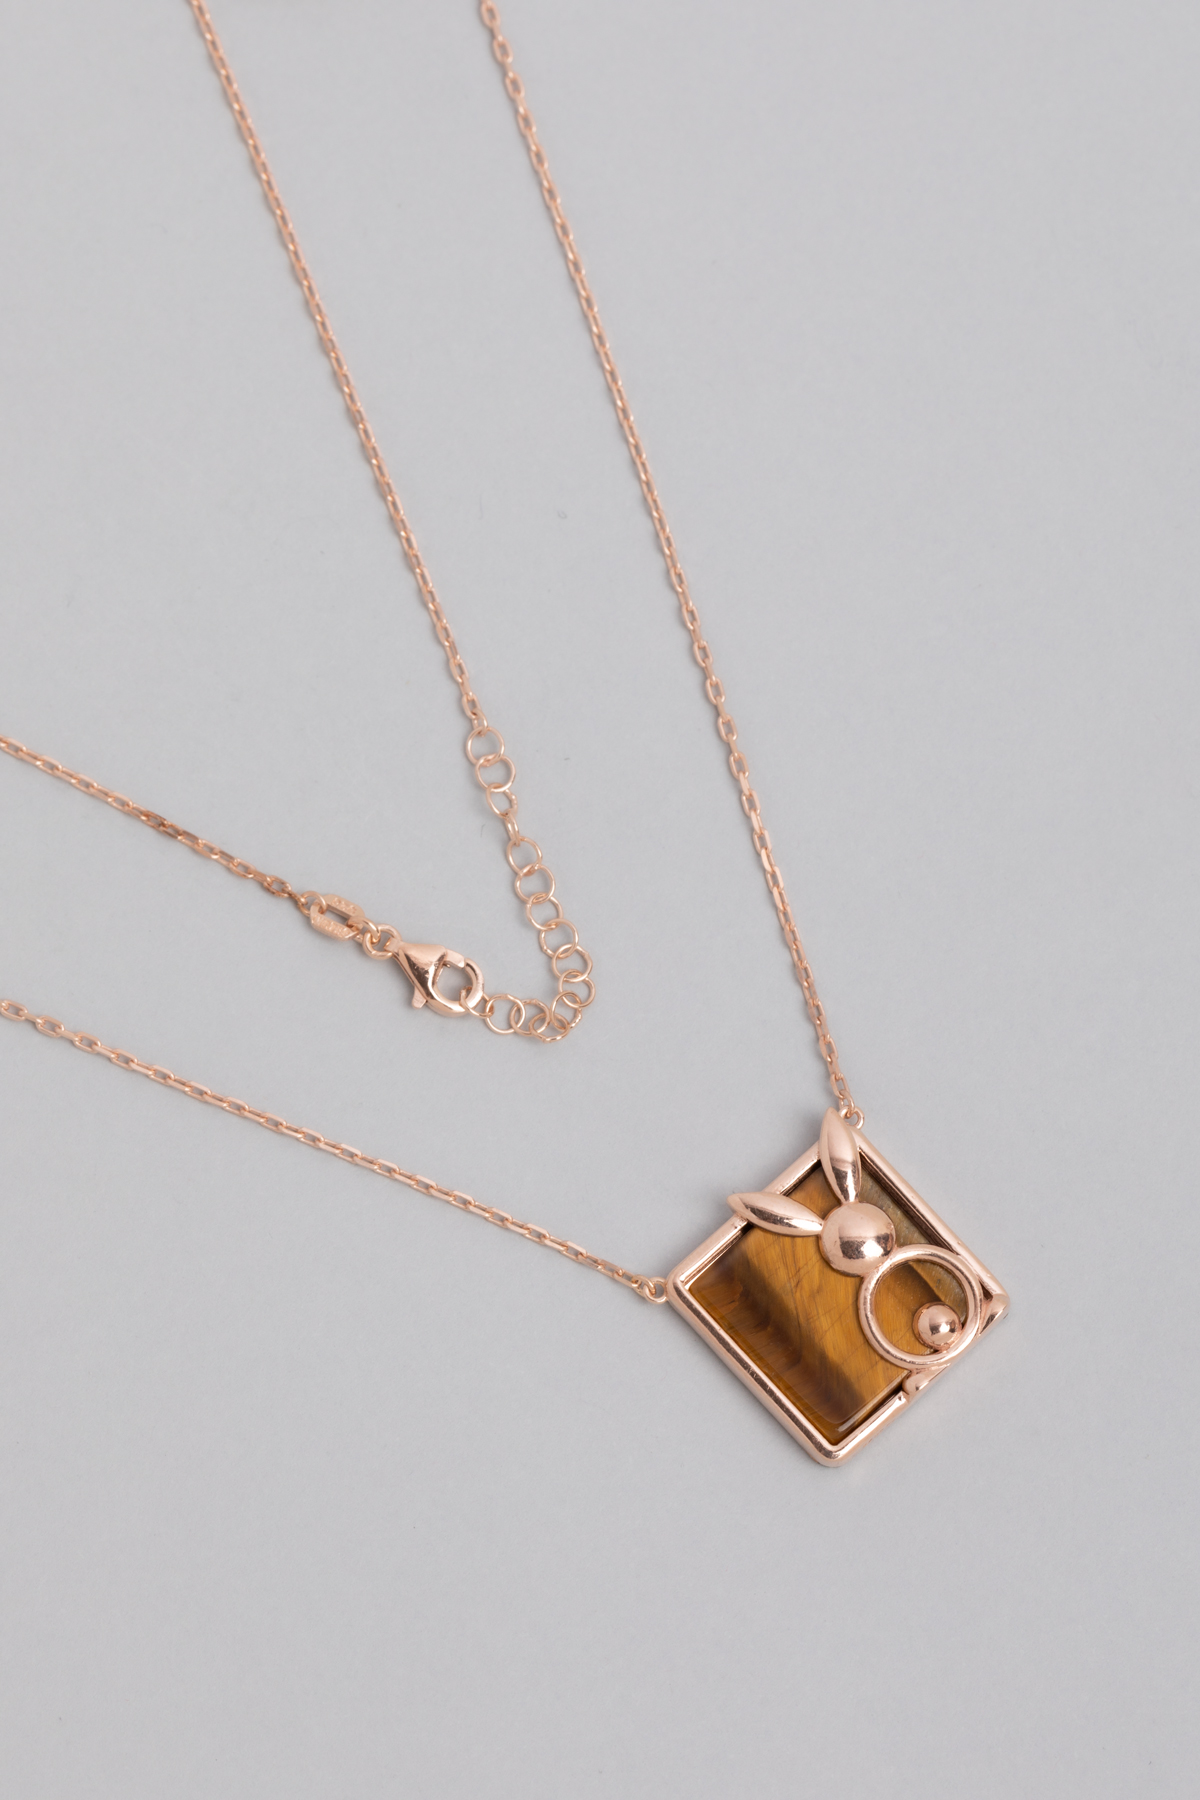 18K Rose Gold Plated Silver Rabbit Necklace with Tiger Eye Stone